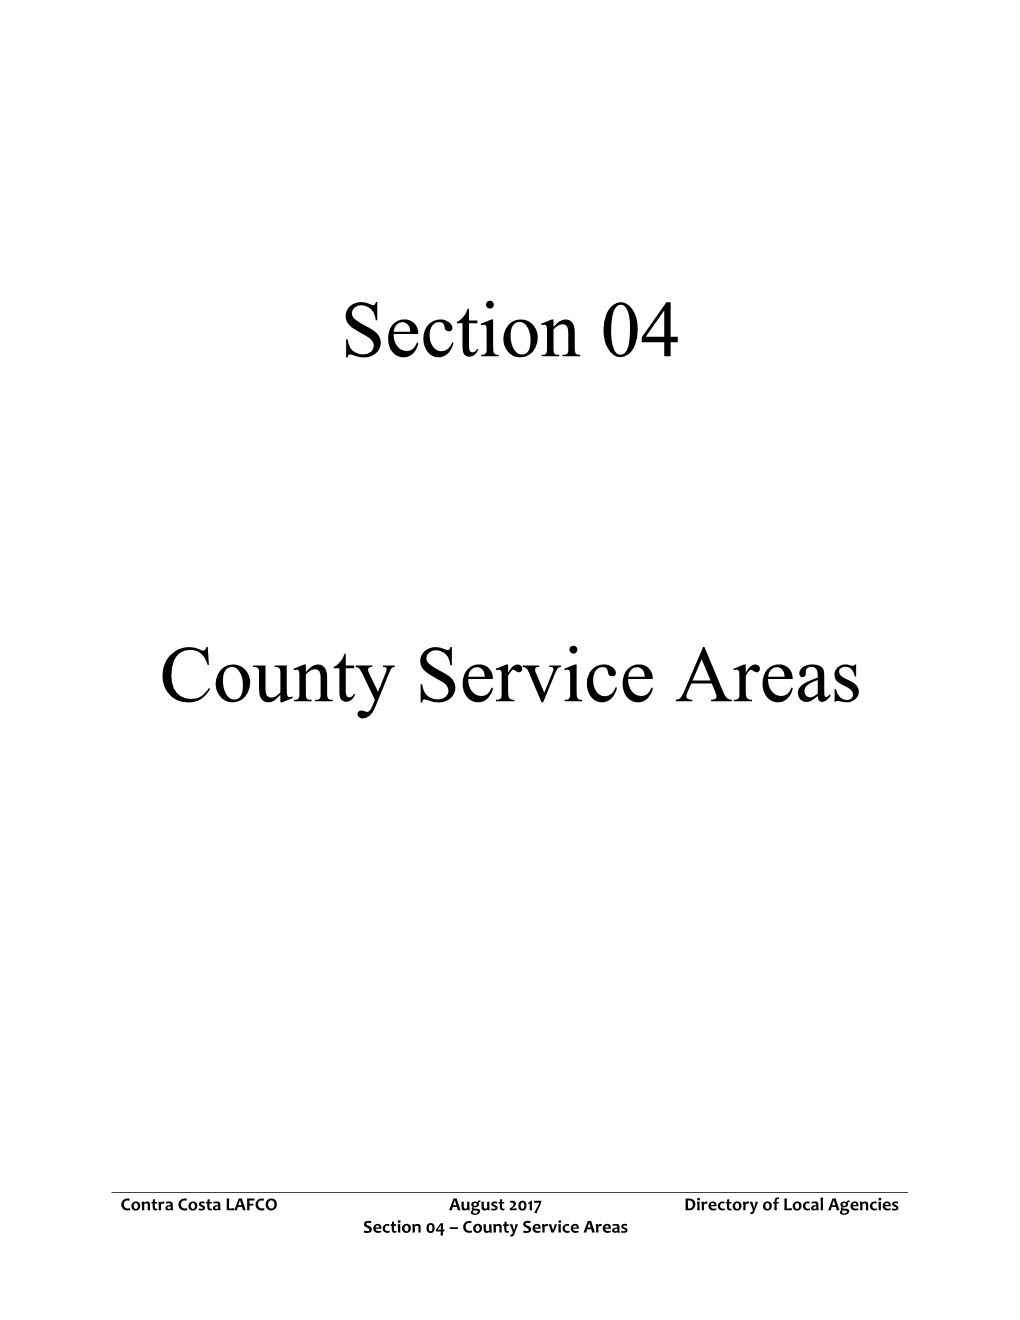 Section 04 County Service Areas